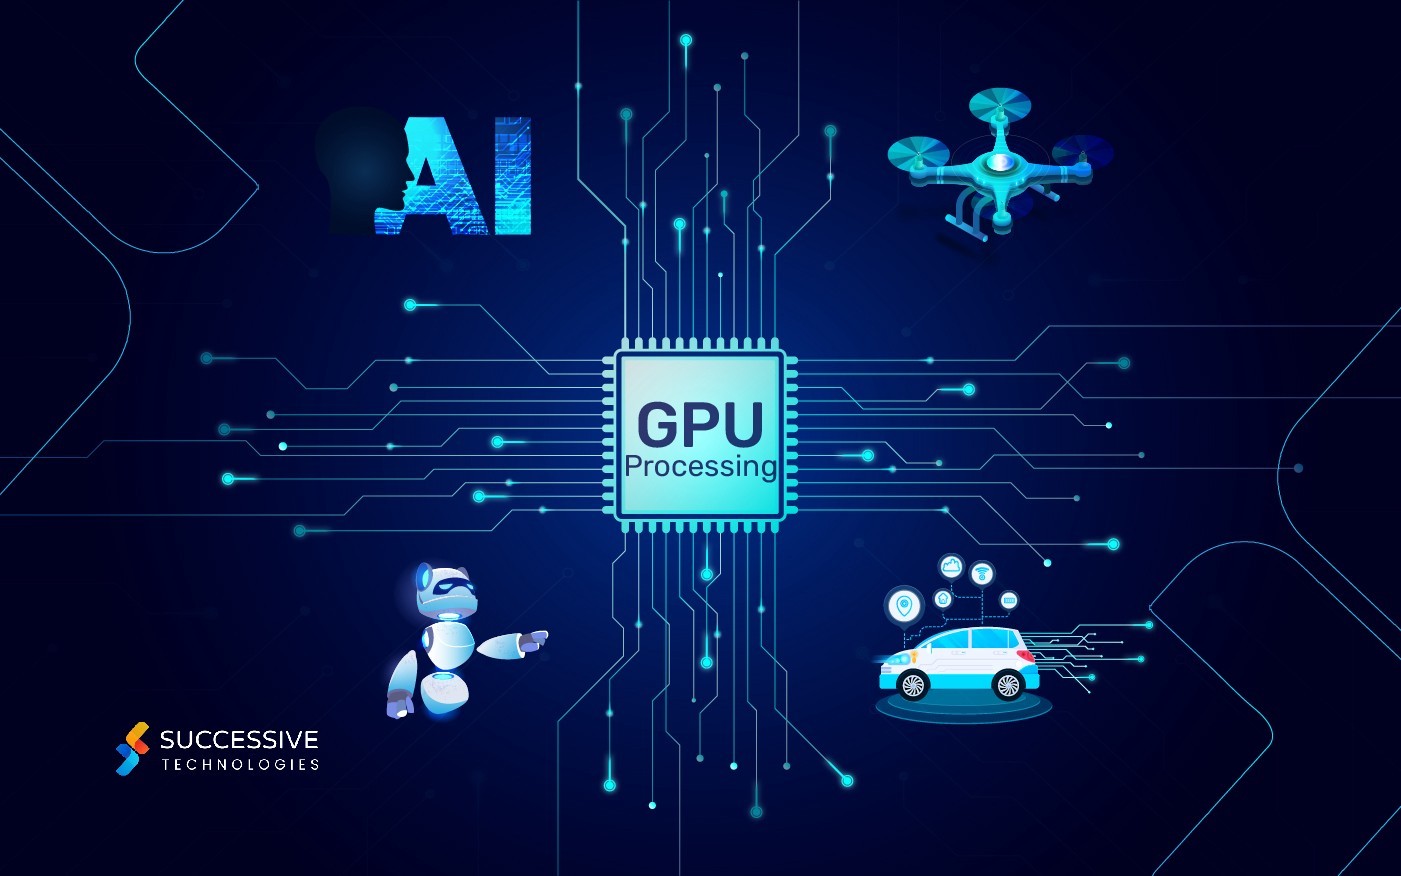 What is the Graphics Processing Unit Accelerated Computing?